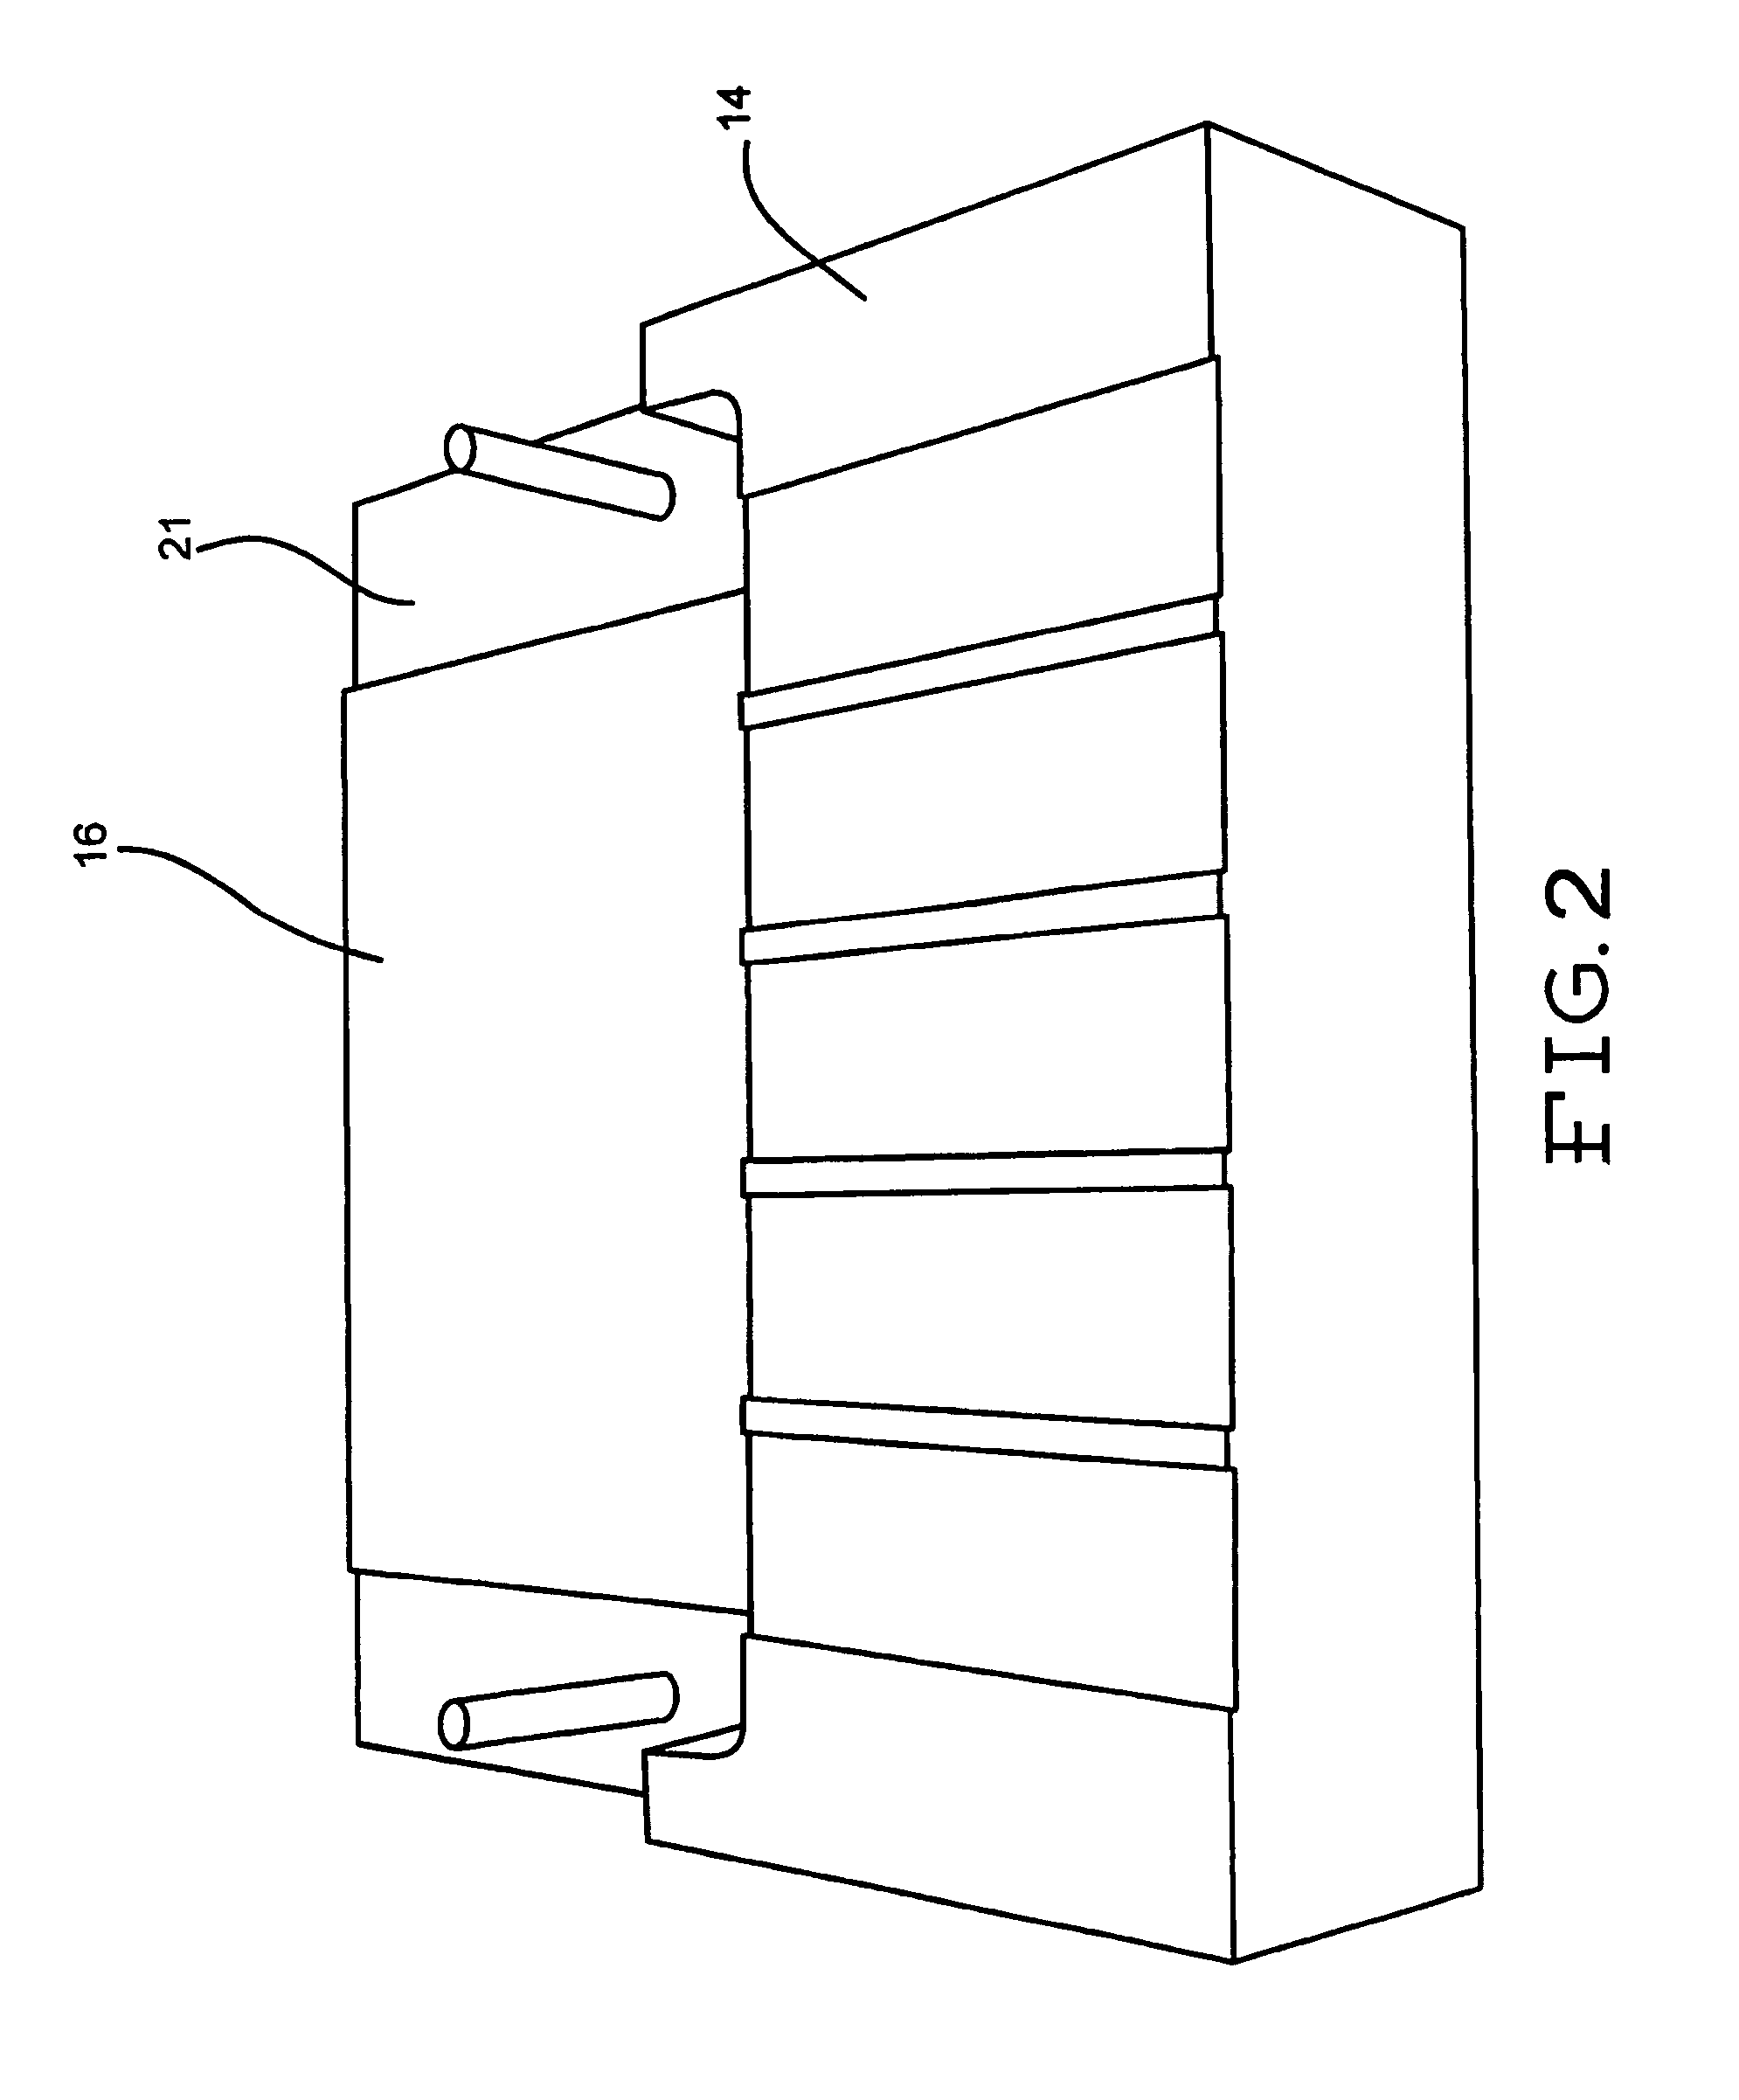 Apparatus and method for fabricating shear test coupons